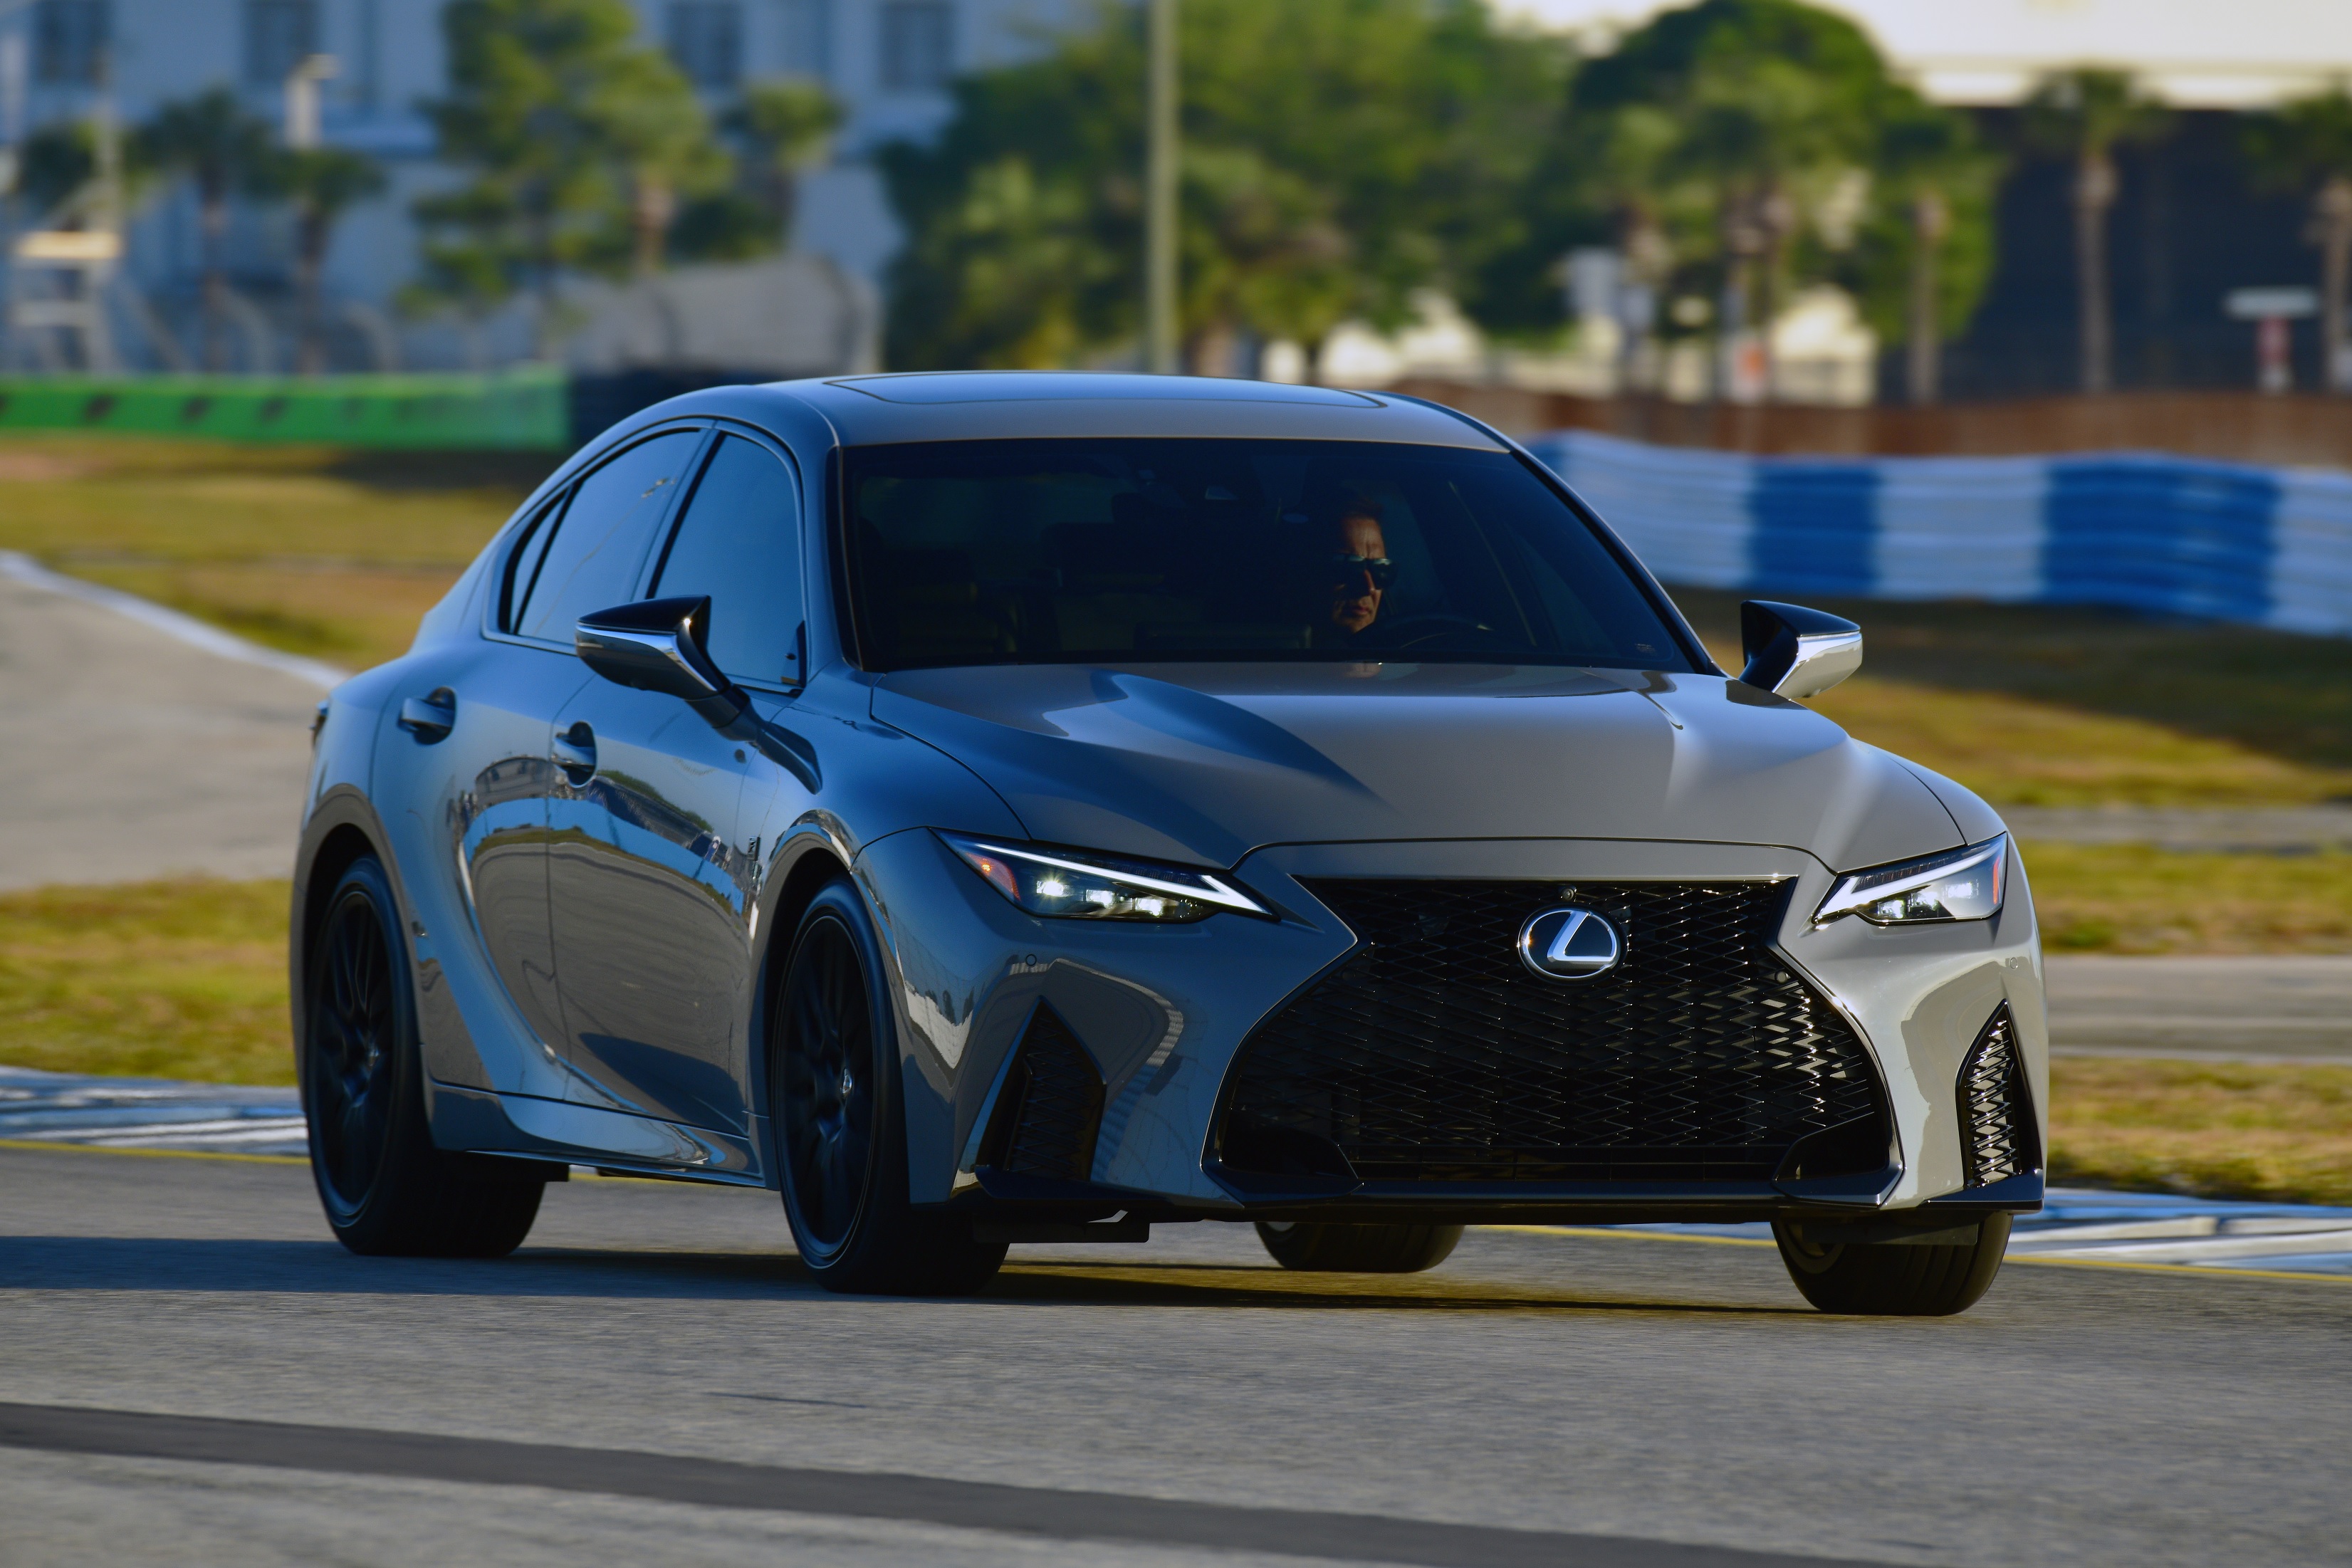 A gray 2022 Lexus IS 500 F Sport Performance Launch Edition on a racetrack